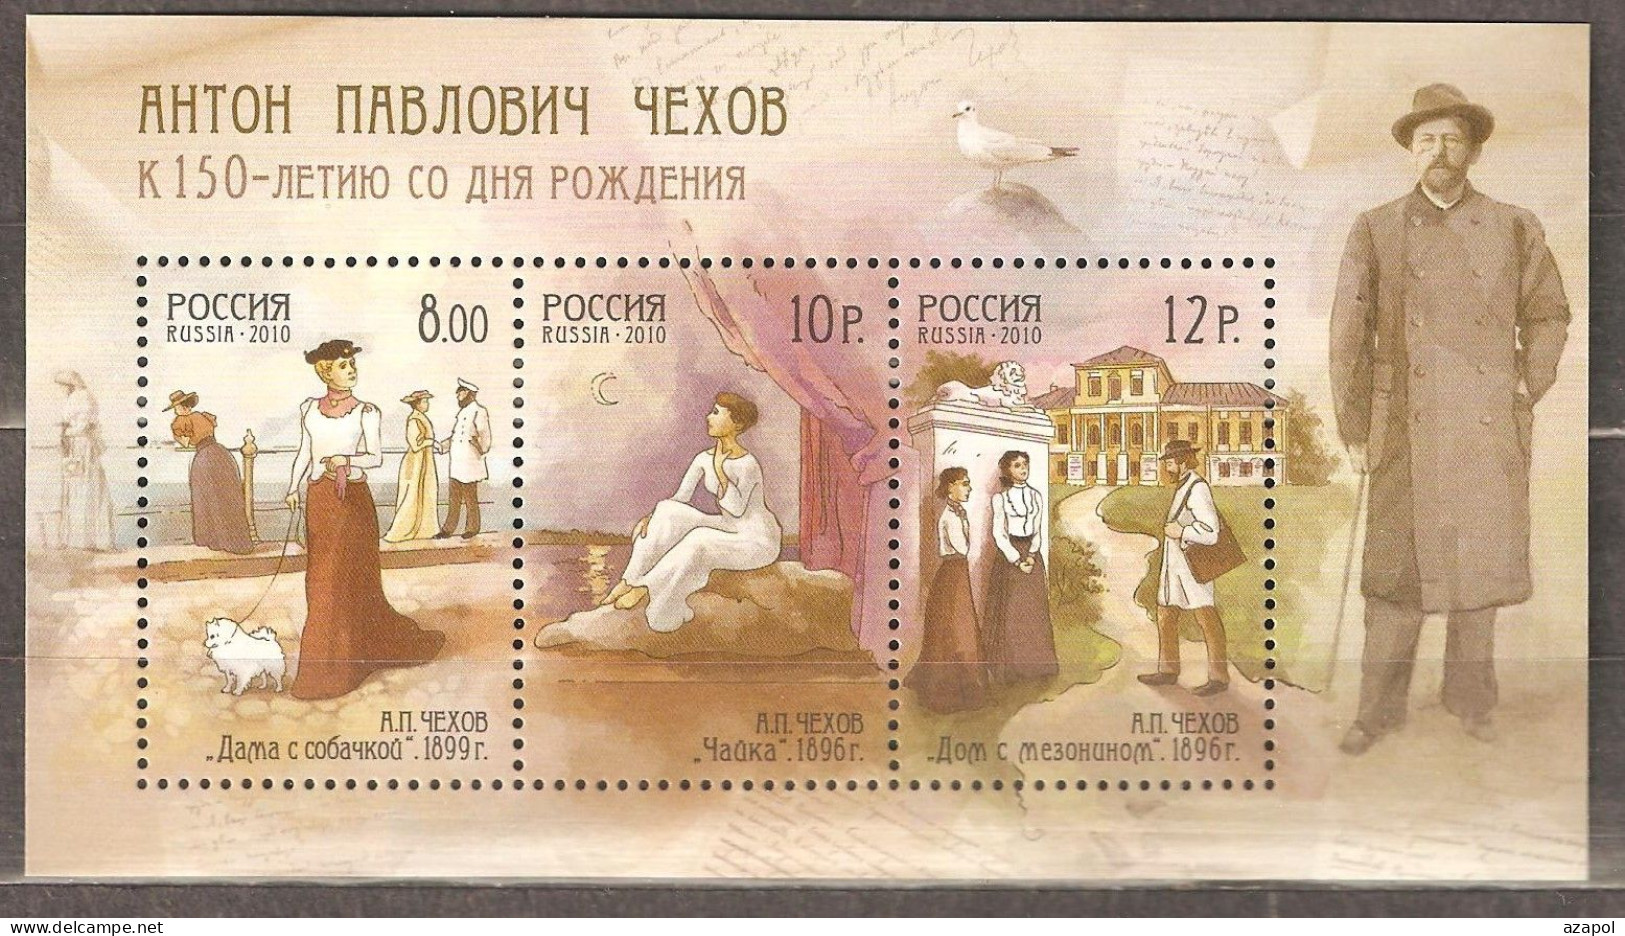 Russia: Mint Block, 150 Years Of The Birth Of Anton Chekhov - Famous Writer, 2010, Mi#Bl-129, MNH - Writers